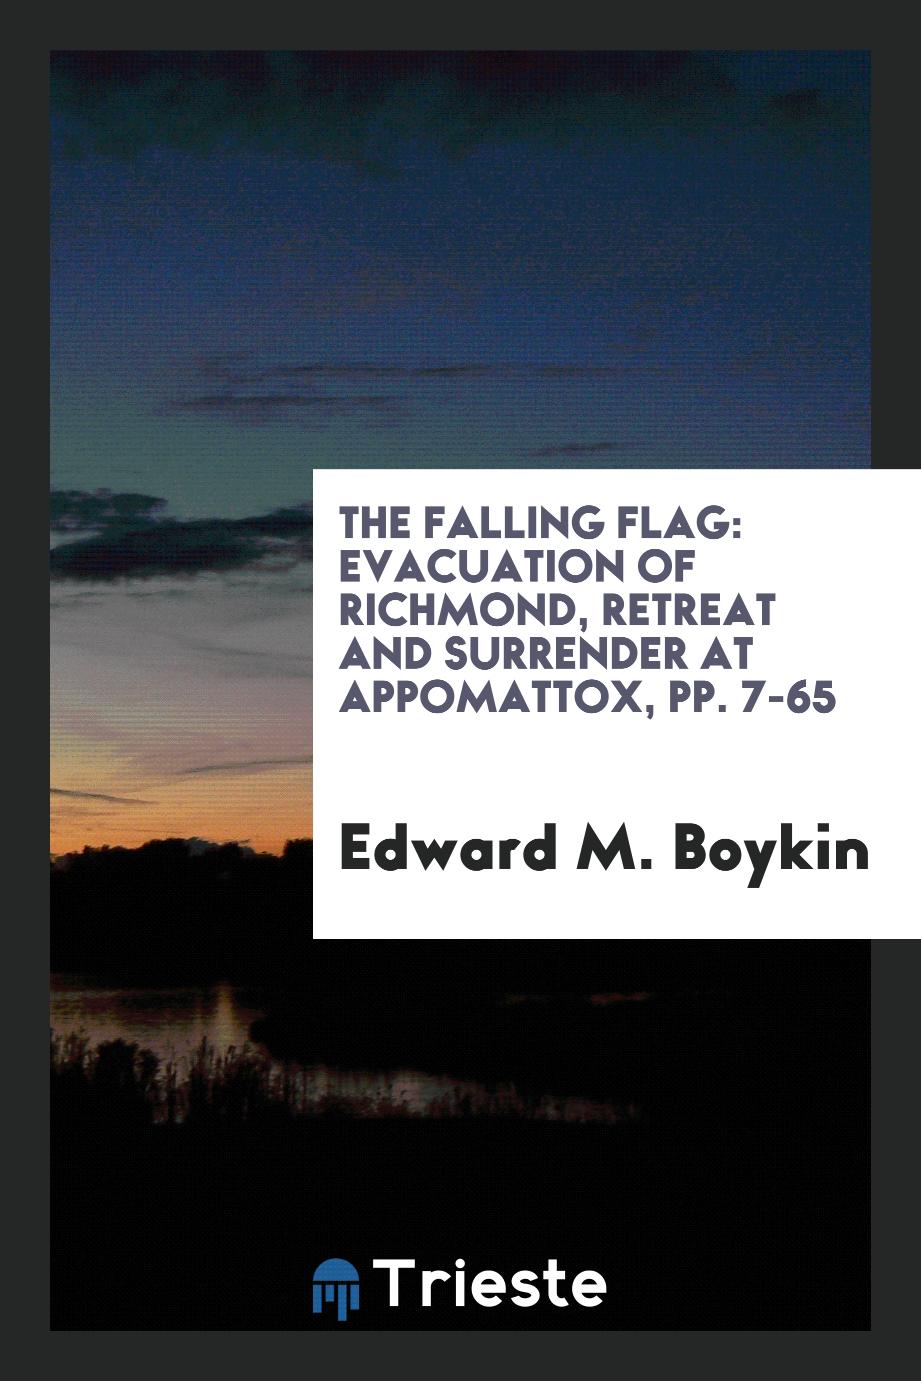 The Falling Flag: Evacuation of Richmond, Retreat and Surrender at Appomattox, pp. 7-65